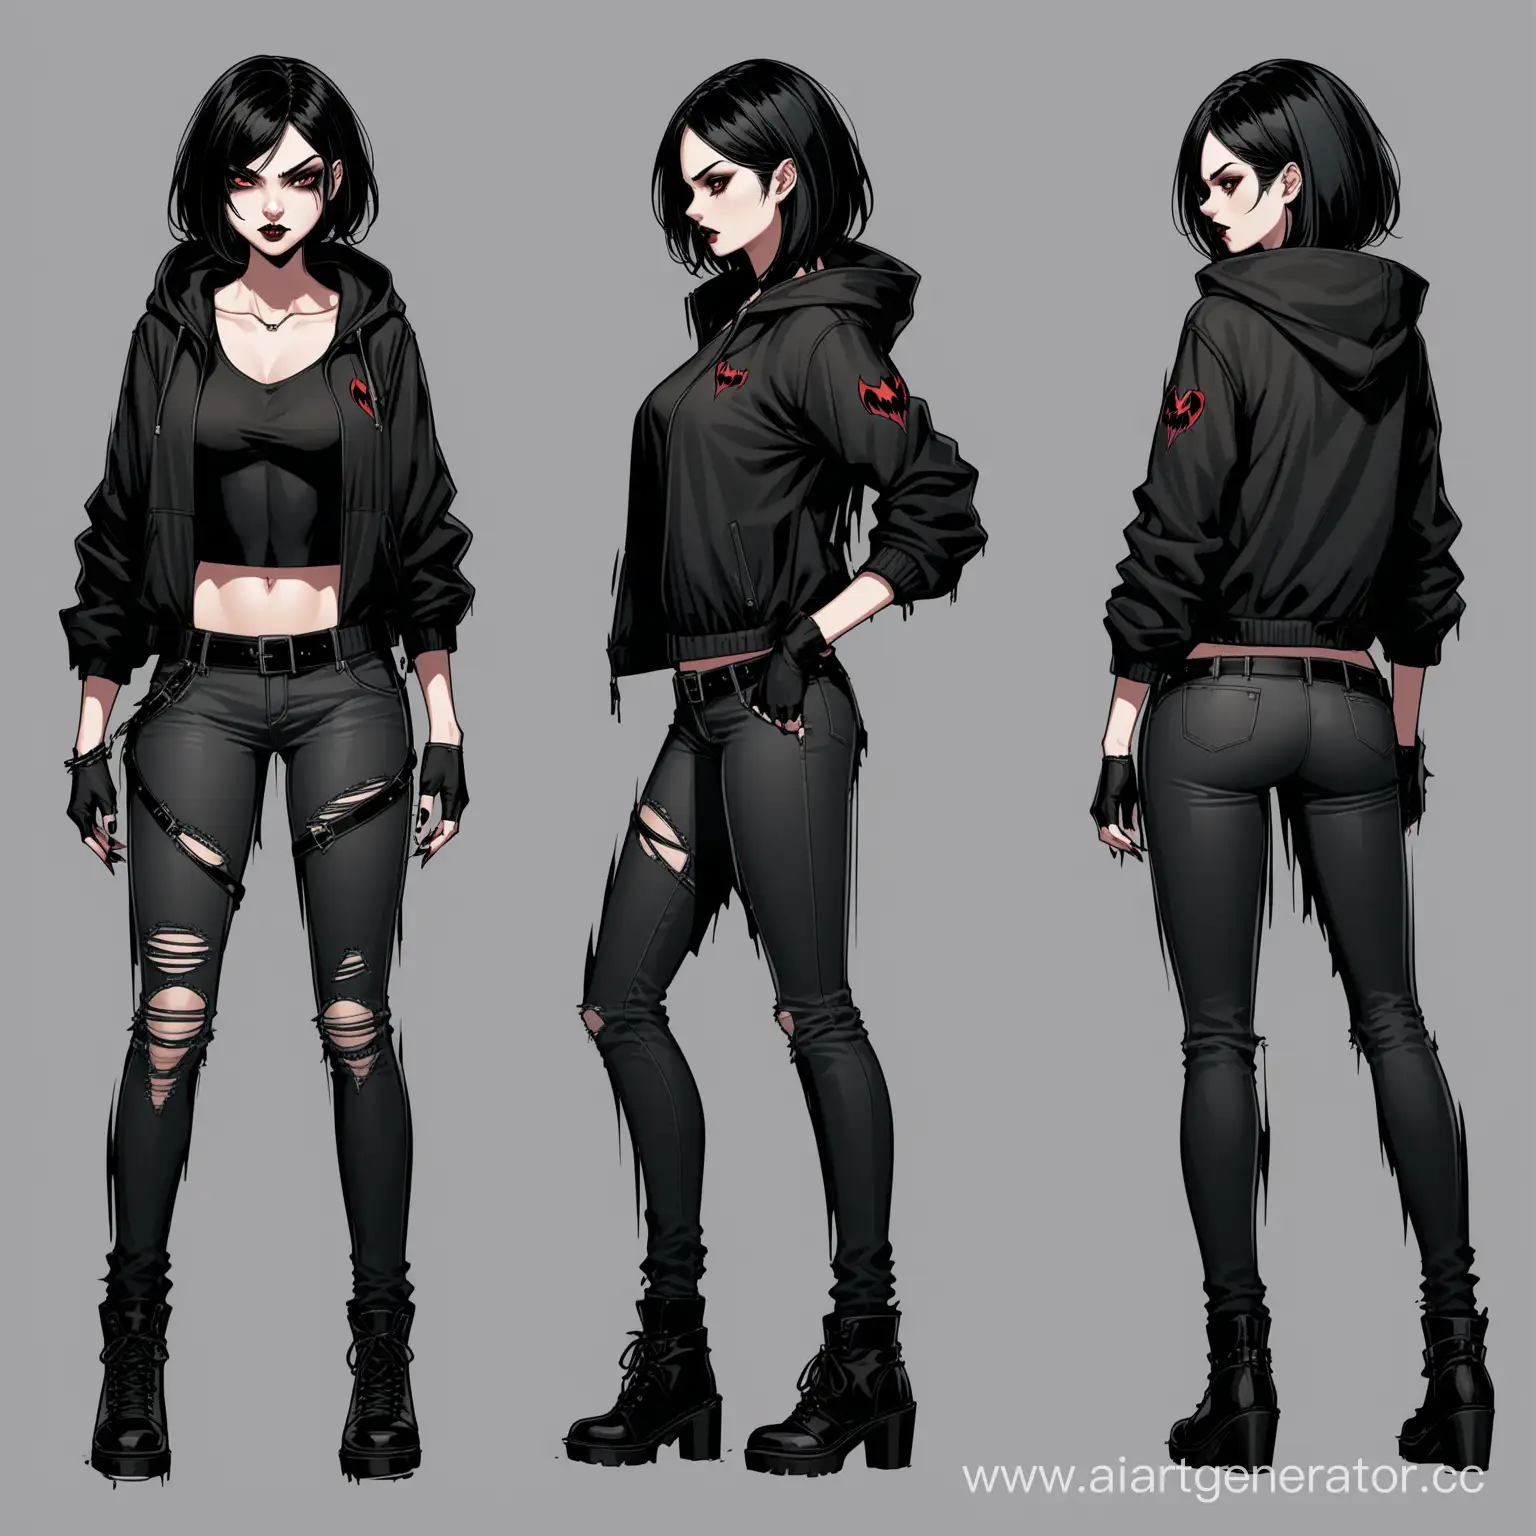 Solo, official art, vampiress, reference sheet, black skin girl with short black hair, indifferent face, full-length, beautiful face, drawing, digital art, ultra hd, multiple views, modern clothes, black ripped jeans, black windbreaker, belts, badass girl, cool girl